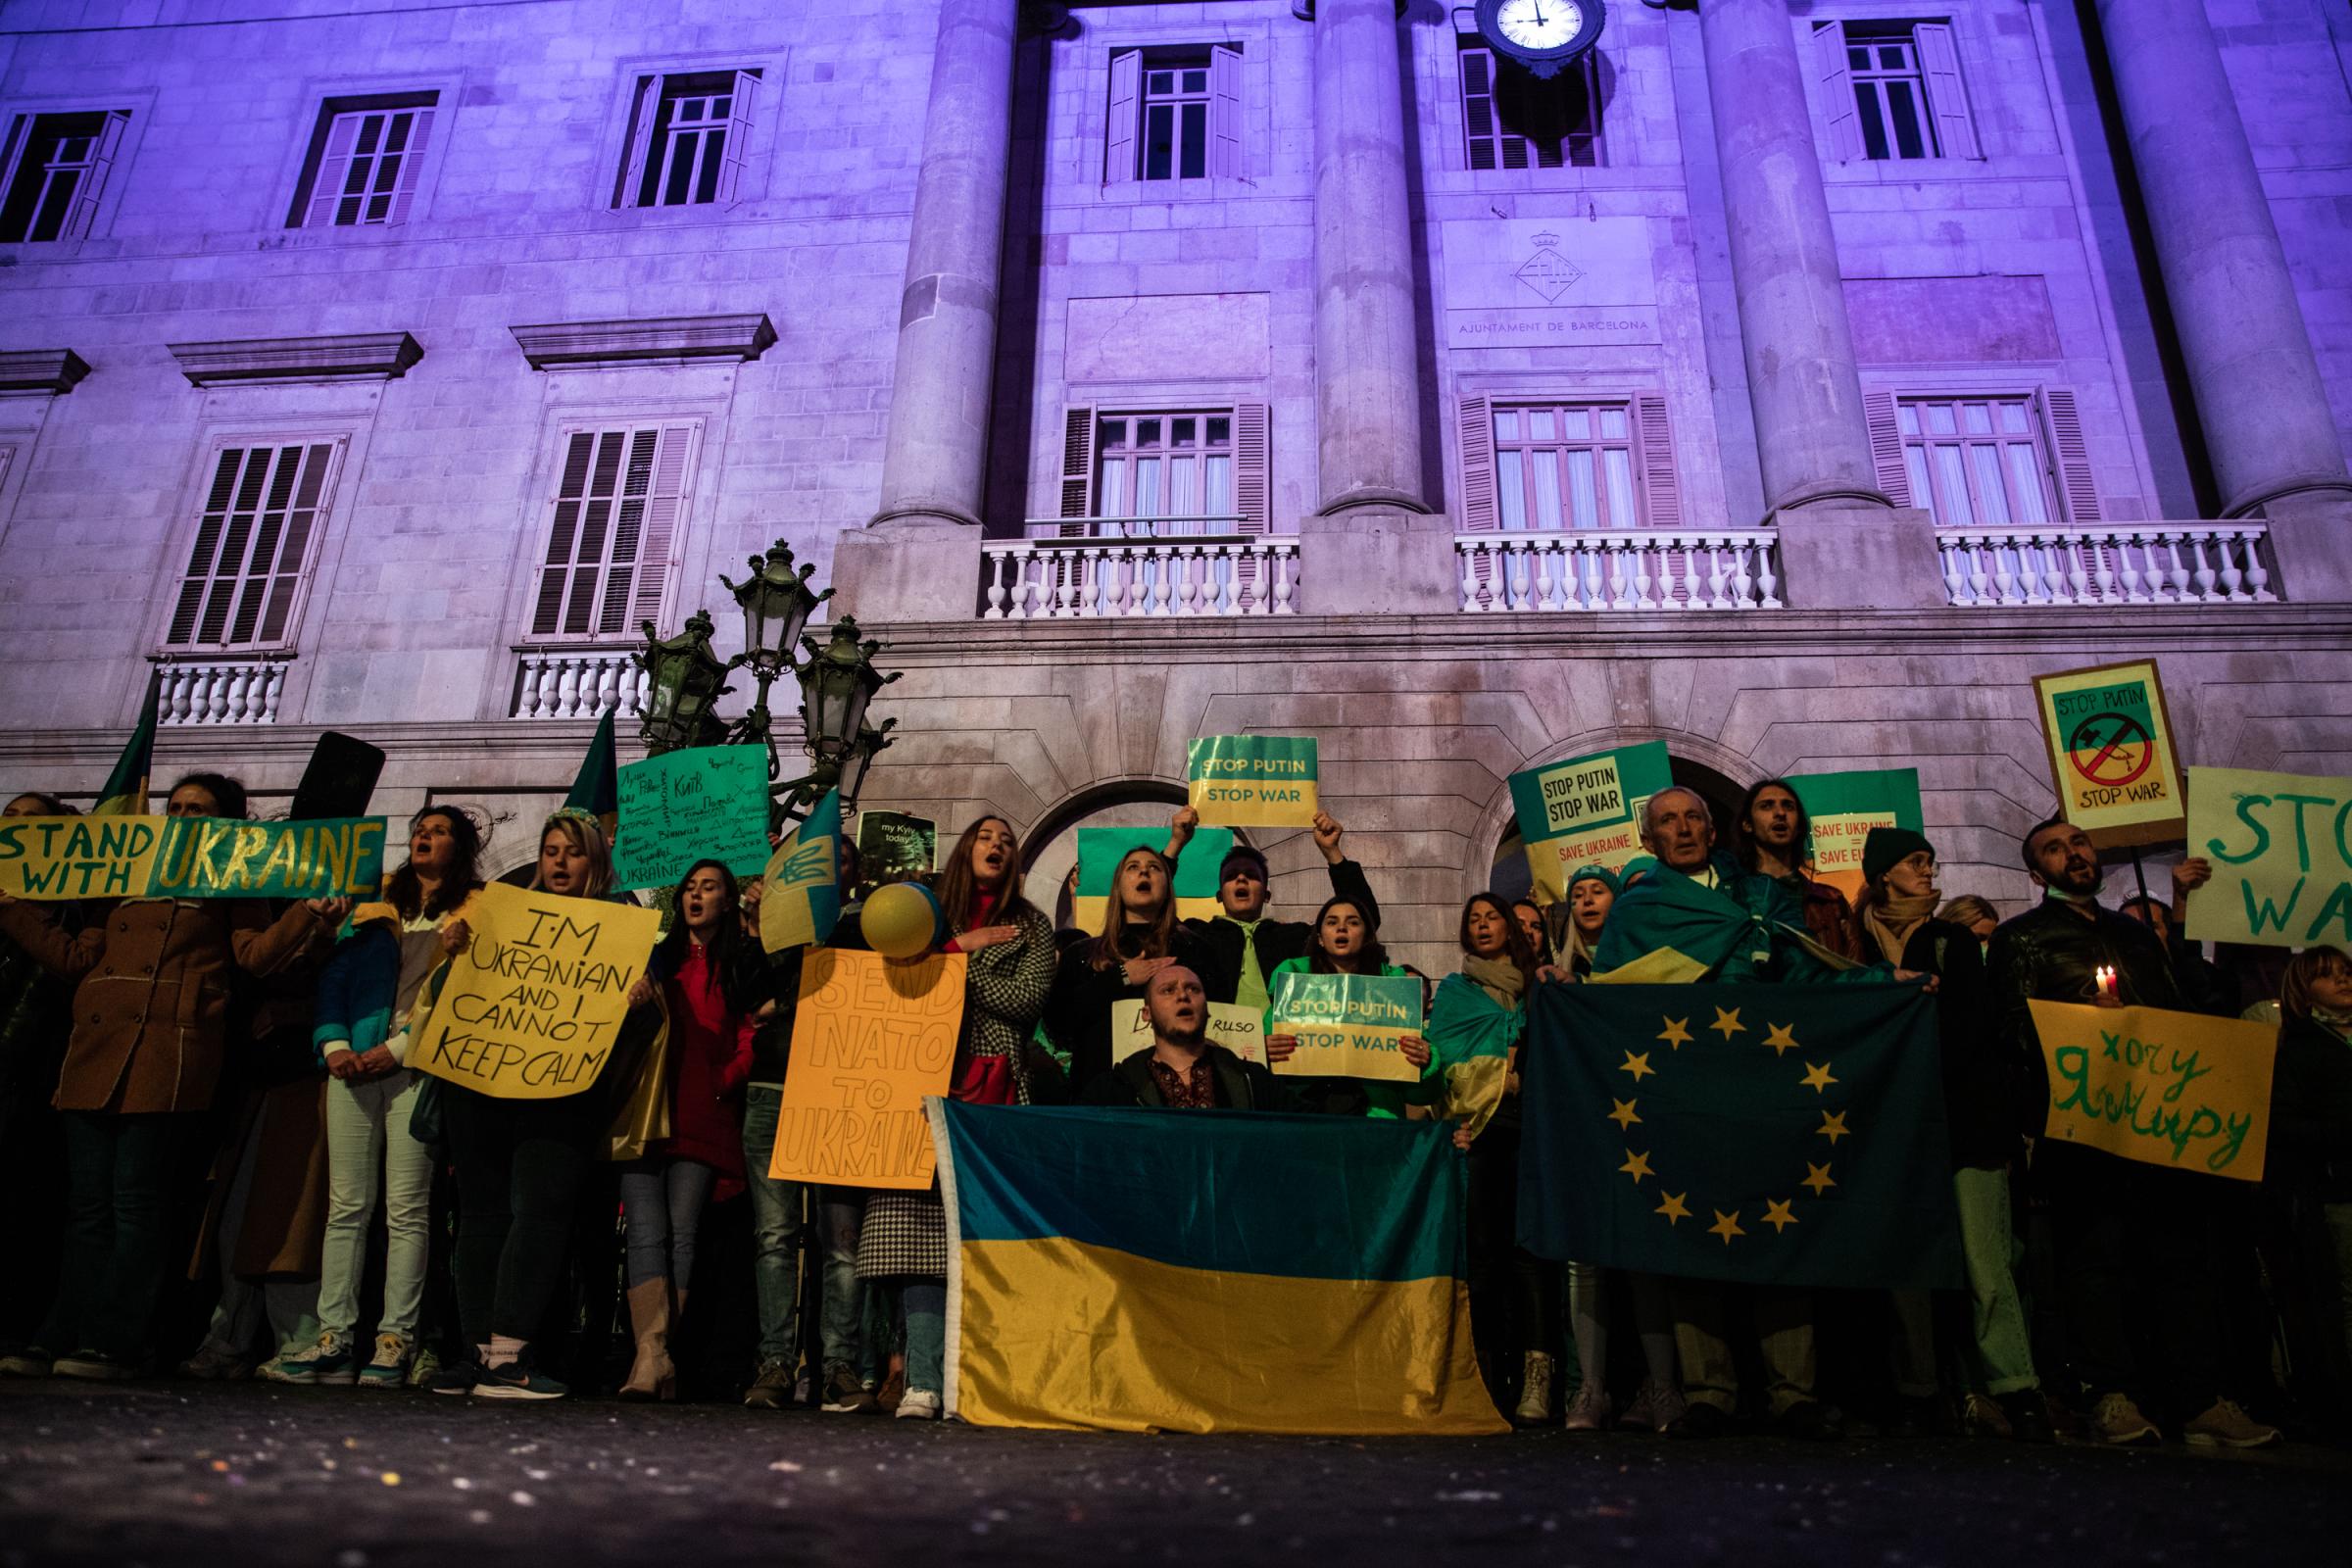 Protestors In Spain Rally For Ukraine After Russian Invasion - BARCELONA, SPAIN - FEBRUARY 25: People take part in the...